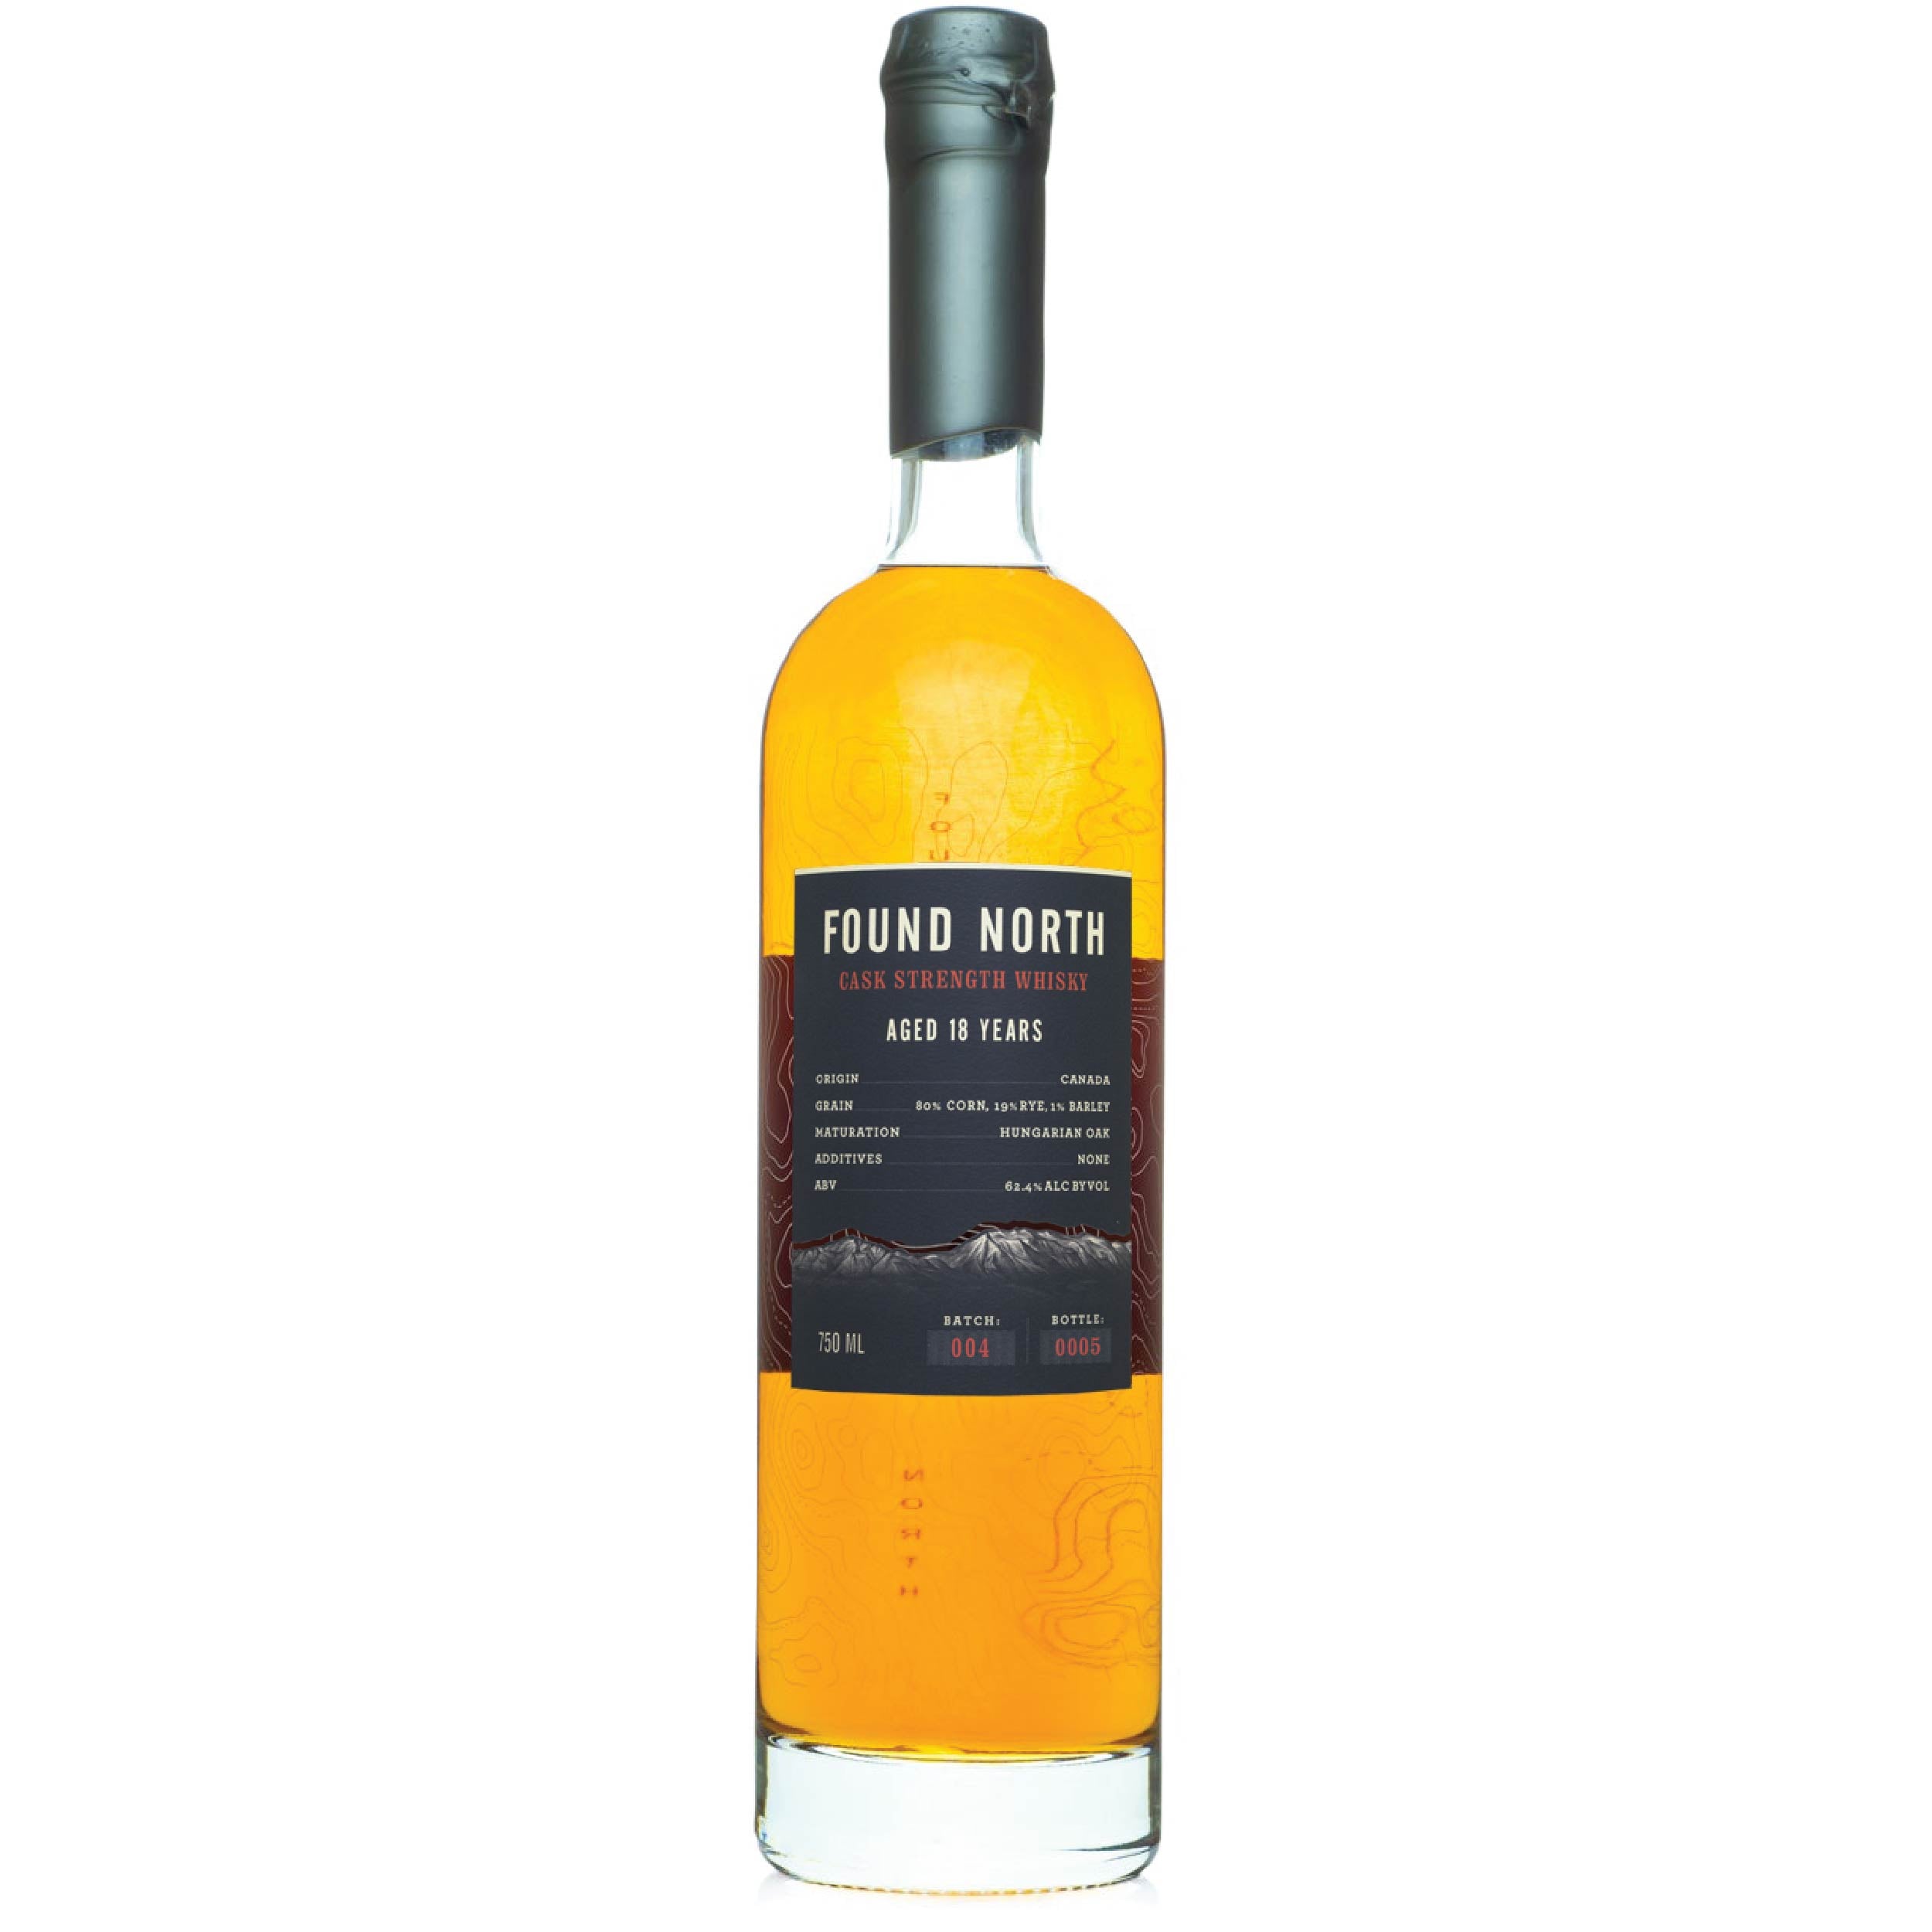 Found North "Batch 004" 18 Year Cask Strength Whisky